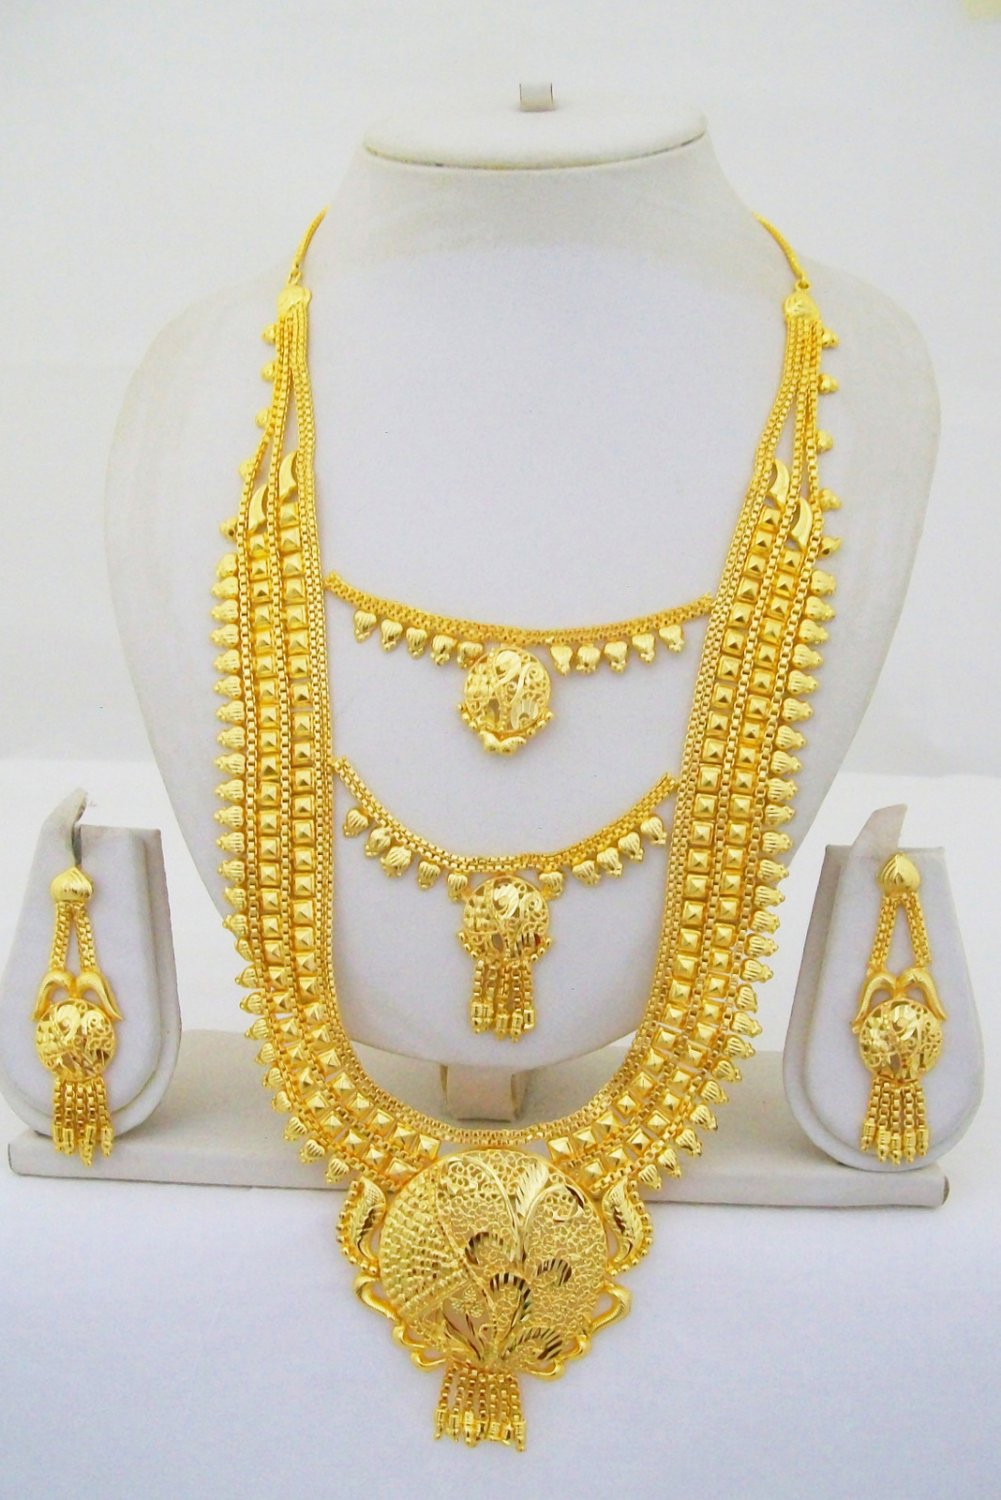 Gold Plated Indian Rani Haar Necklace Filigree Long Layered Vintage Ethnic Jewelry Set